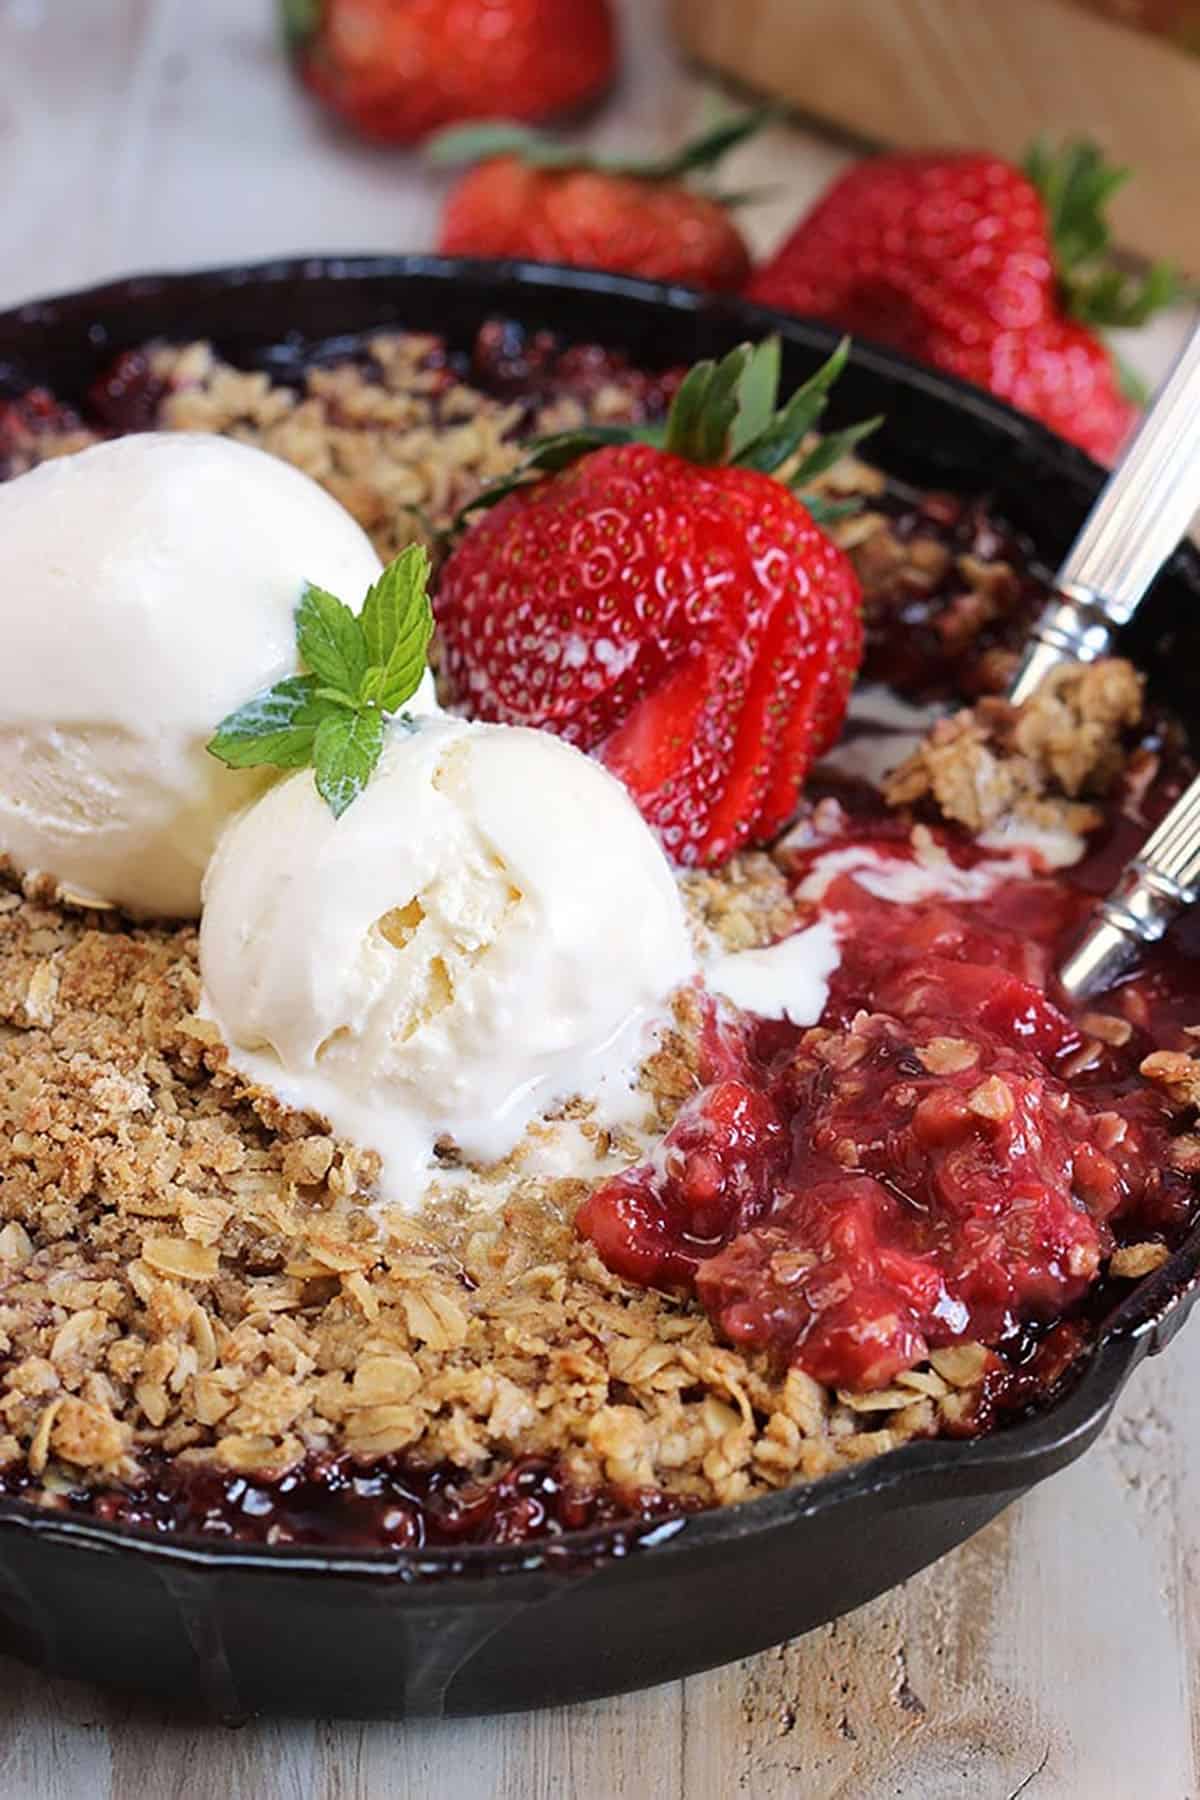 Strawberry Rhubarb Crisp in a black skillet with two scoops of vanilla ice cream on top